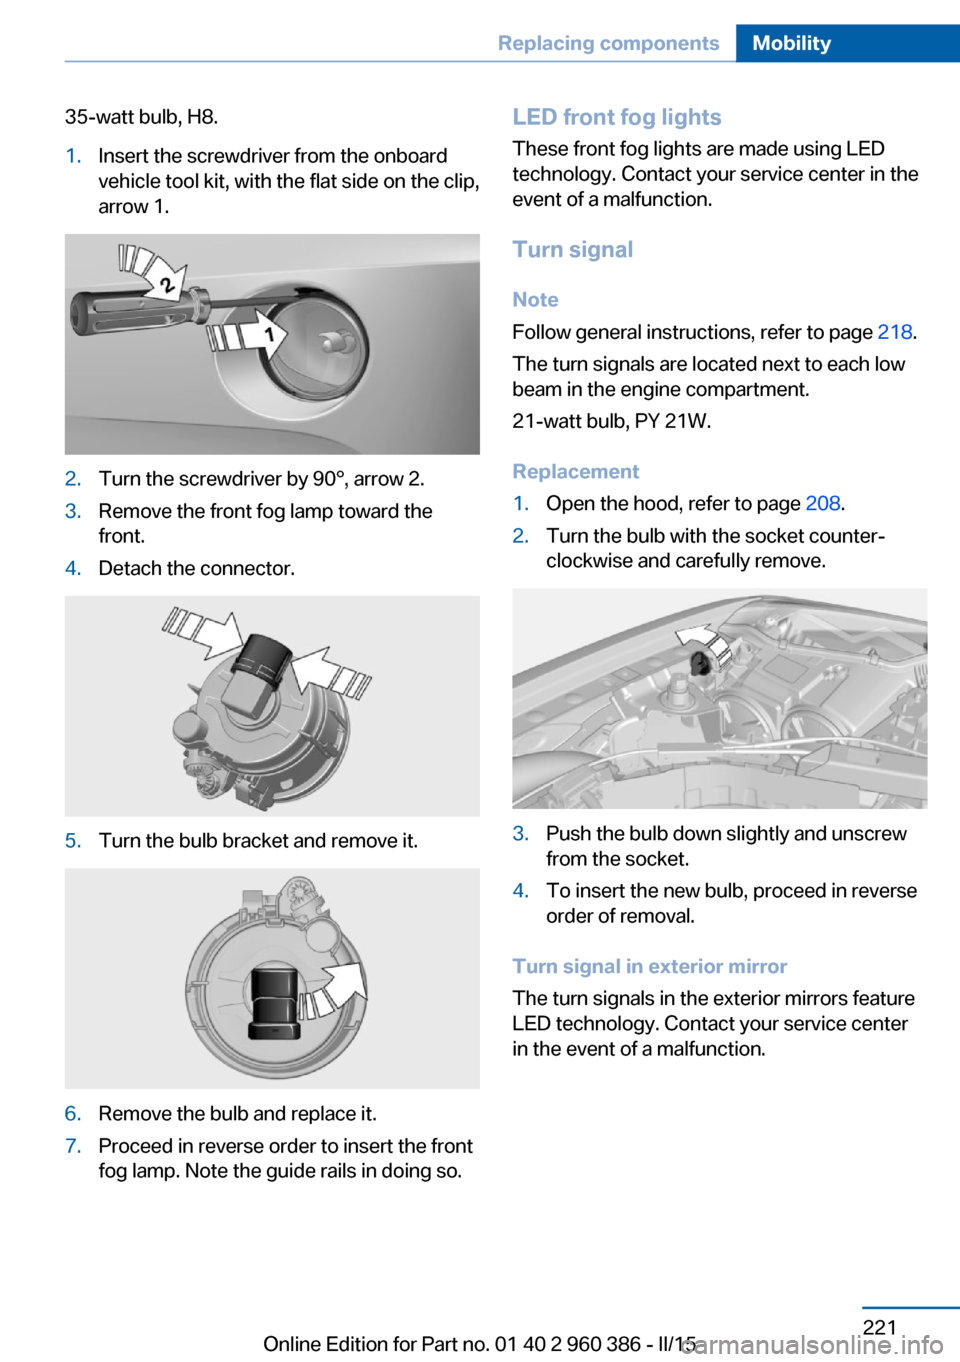 BMW X3 2015 F25 Owners Manual 35-watt bulb, H8.1.Insert the screwdriver from the onboard
vehicle tool kit, with the flat side on the clip,
arrow 1.2.Turn the screwdriver by 90°, arrow 2.3.Remove the front fog lamp toward the
fron